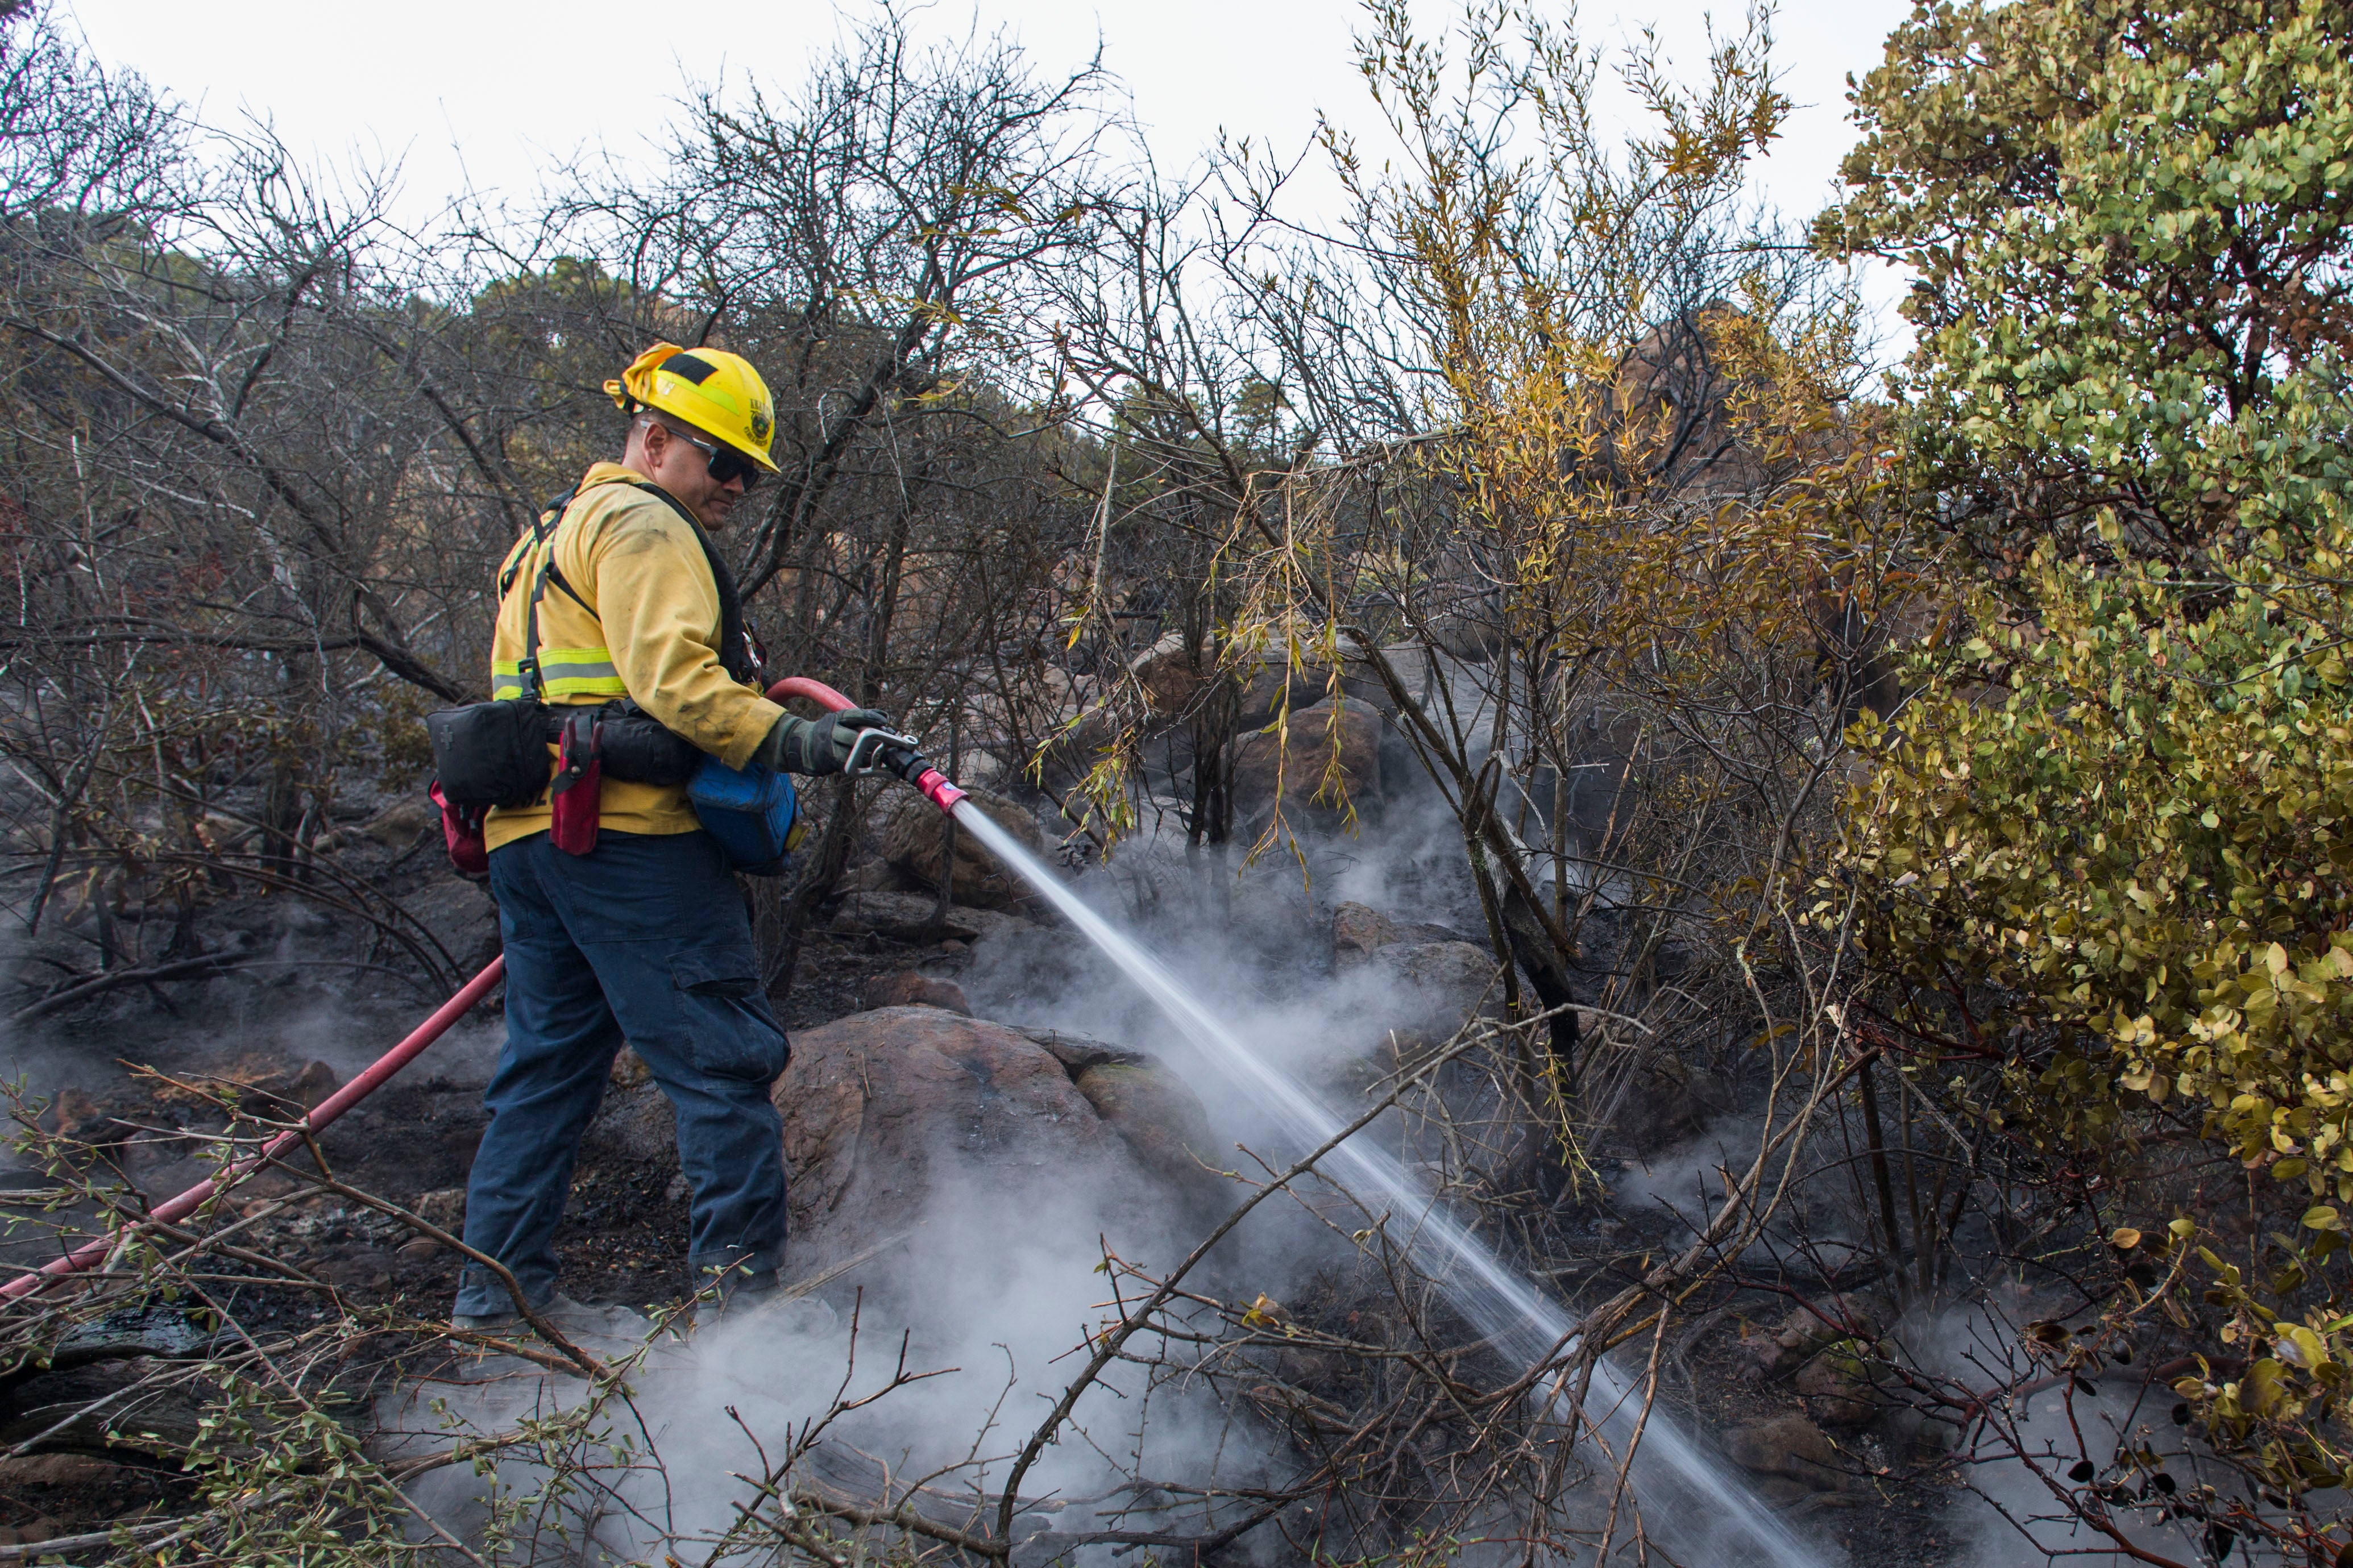 A firefighter puts out hotspots in the Cave Fire at Los Padres National Forest on November 26, 2019 in Santa Barbara, California